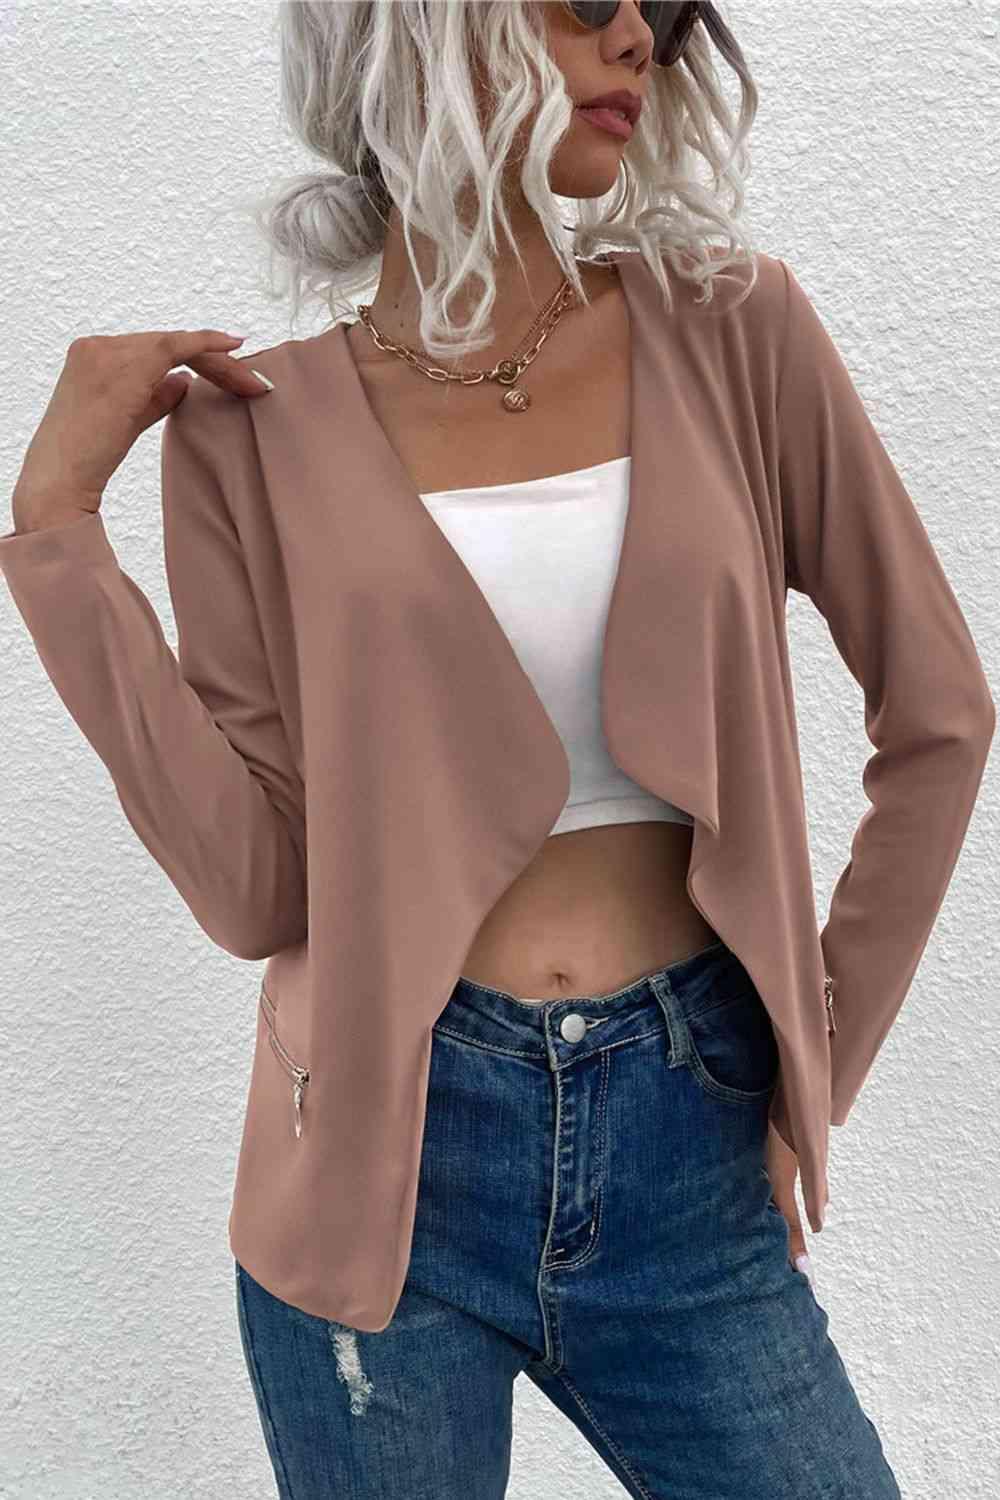 a woman with white hair wearing a tan jacket and jeans